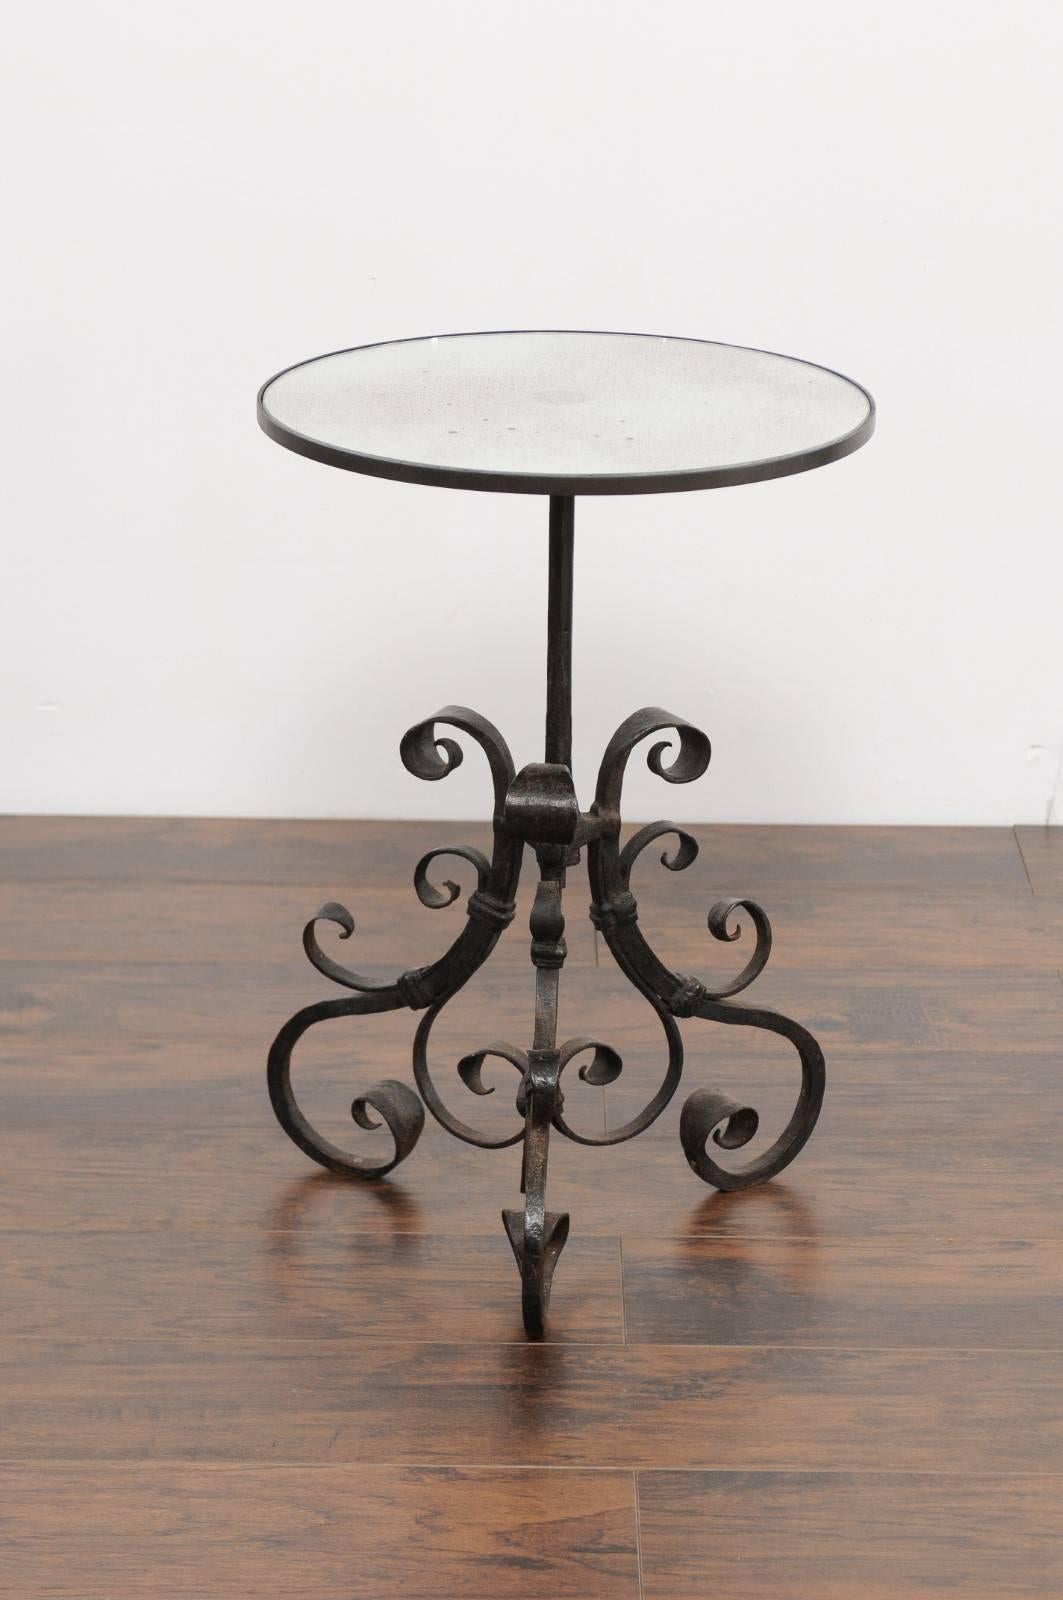 1870s Italian Wrought-Iron Pedestal Side Table with Mirrored Top and Scrolls 2